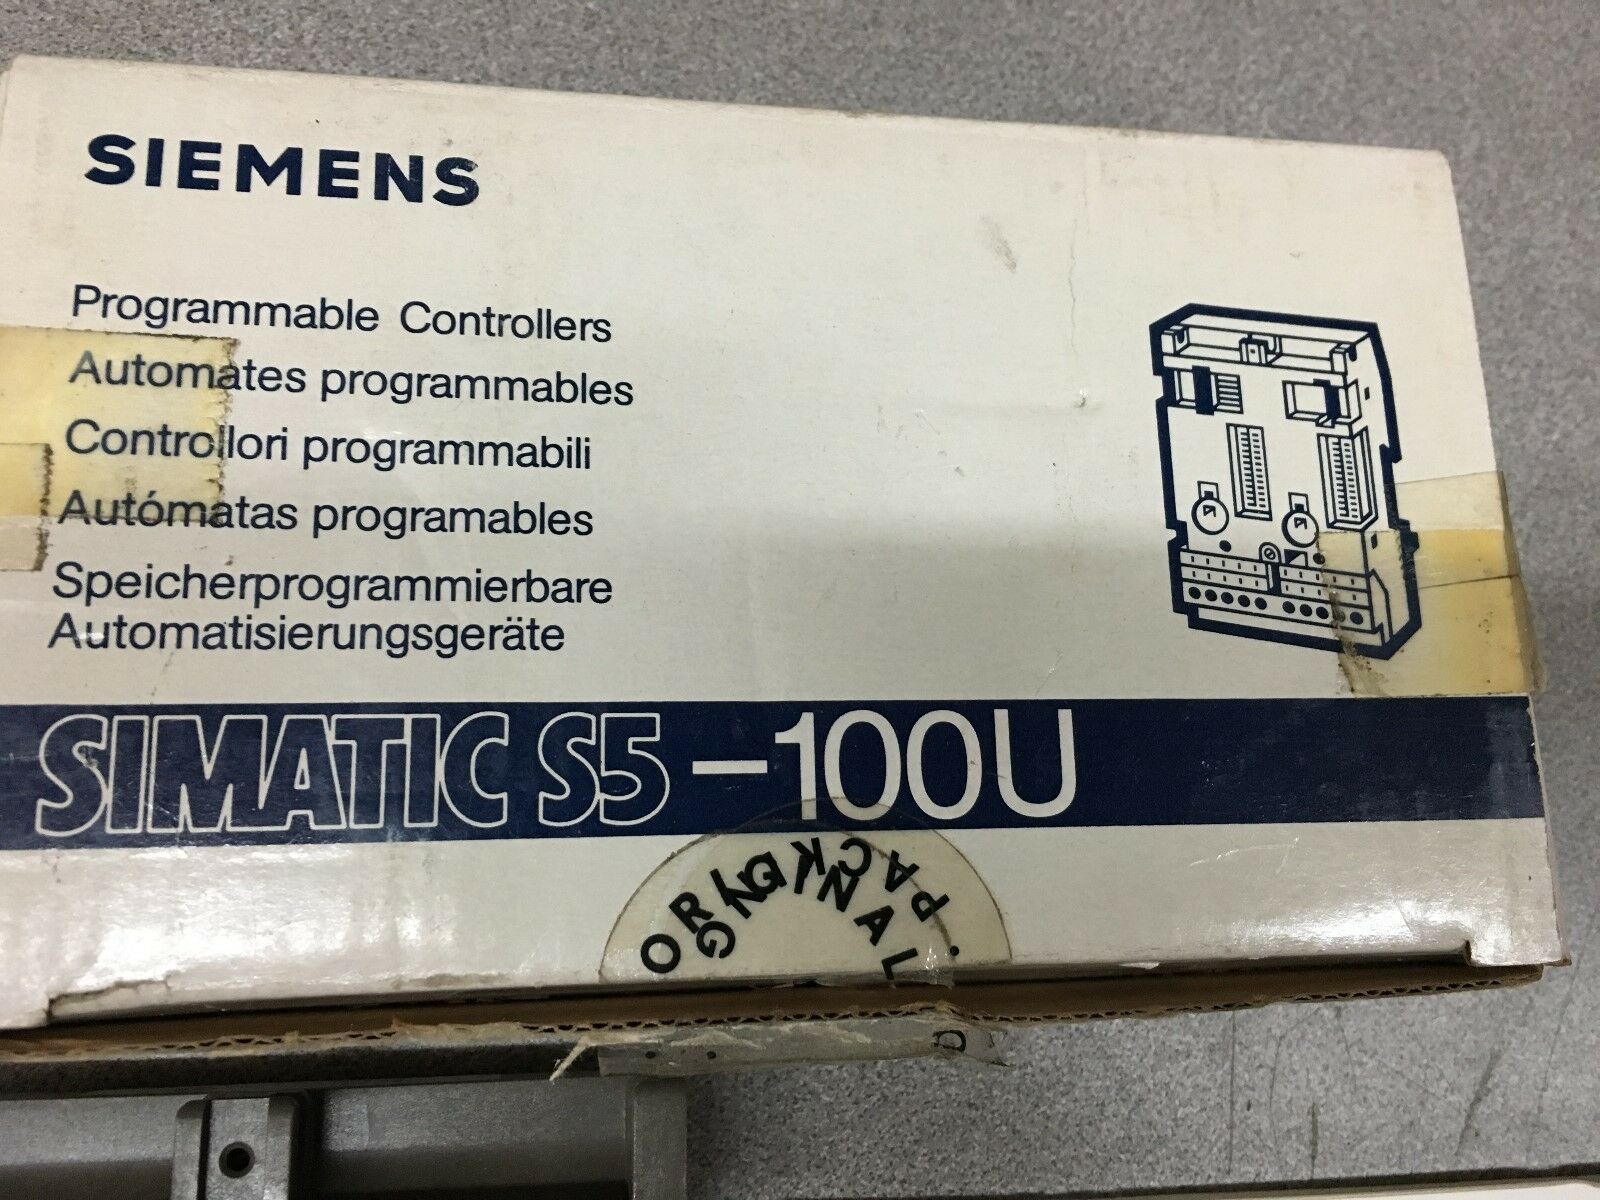 NEW IN BOX SIEMENS SIMATIC S5 COUNTER MODULE 6ES5 385-8MB11